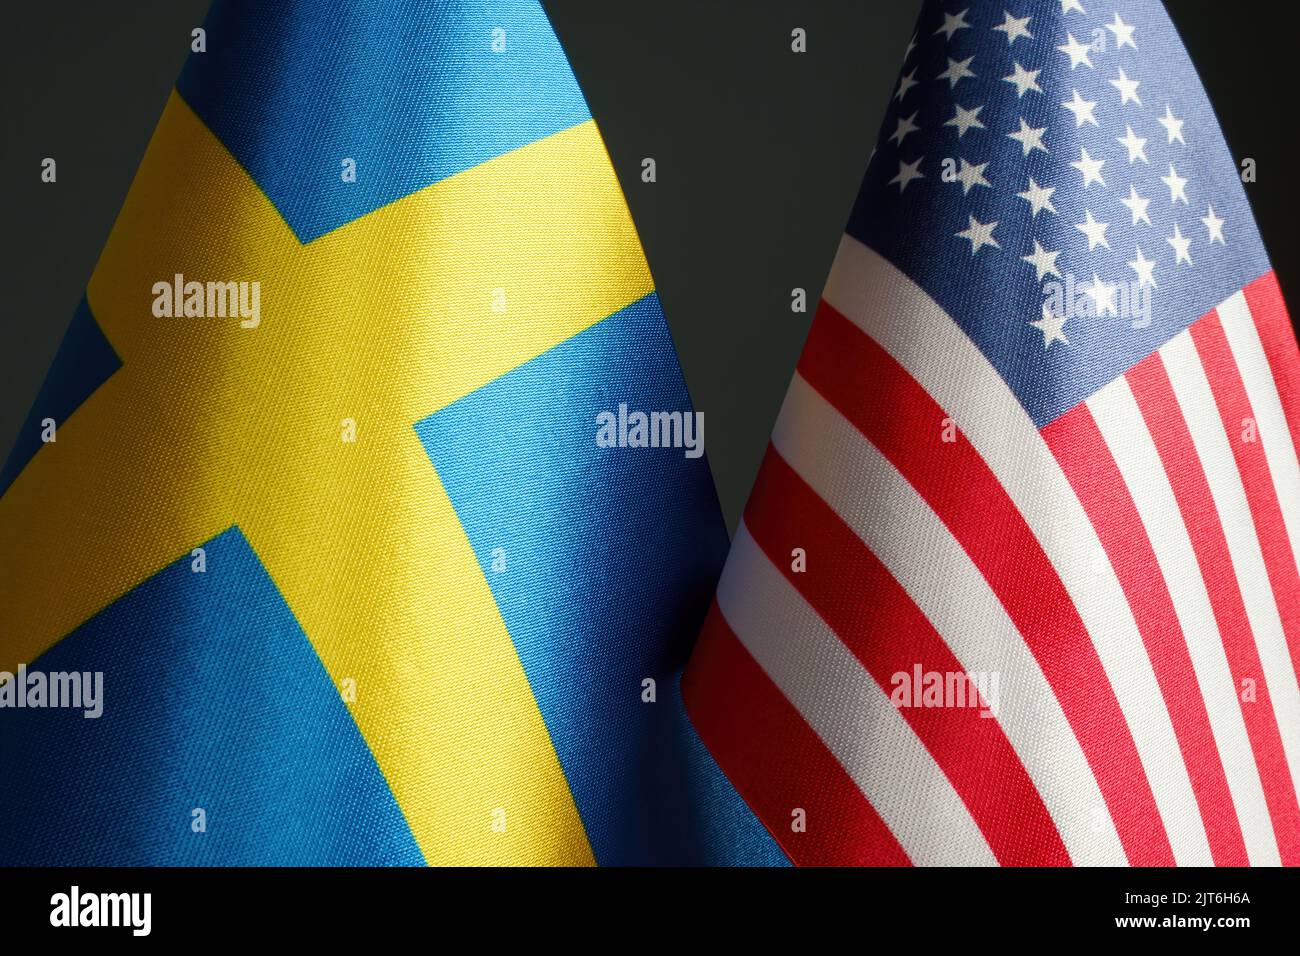 Small flags of Sweden and USA as a symbol of diplomacy. Stock Photo